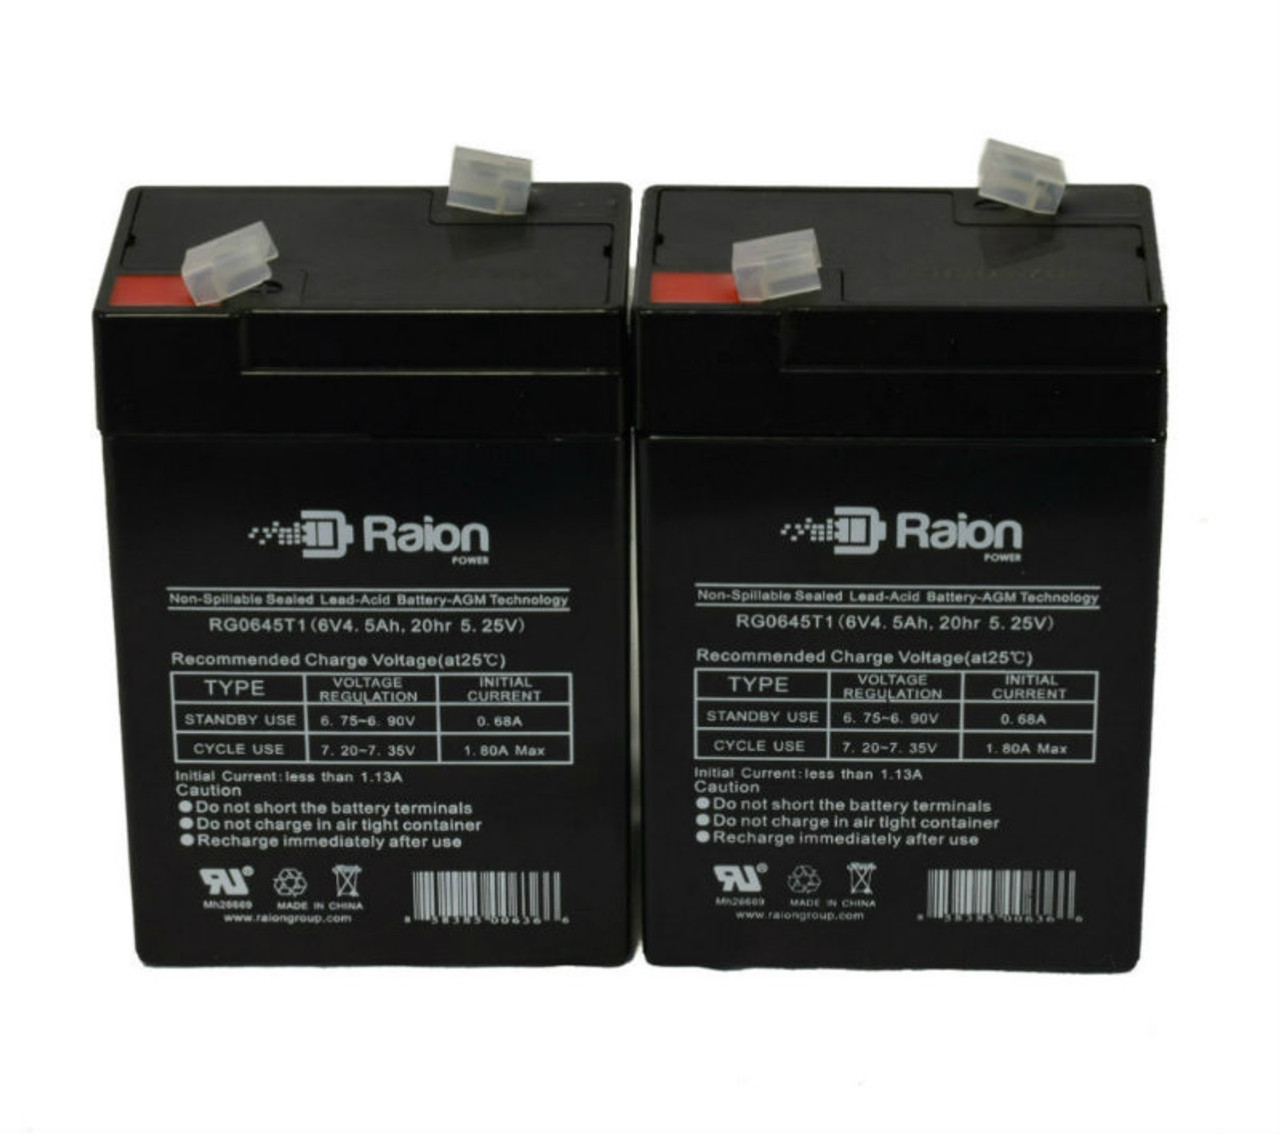 Raion Power 6V 4.5Ah Replacement Emergency Light Battery for Federal Signal BPL26ST-B - 2 Pack